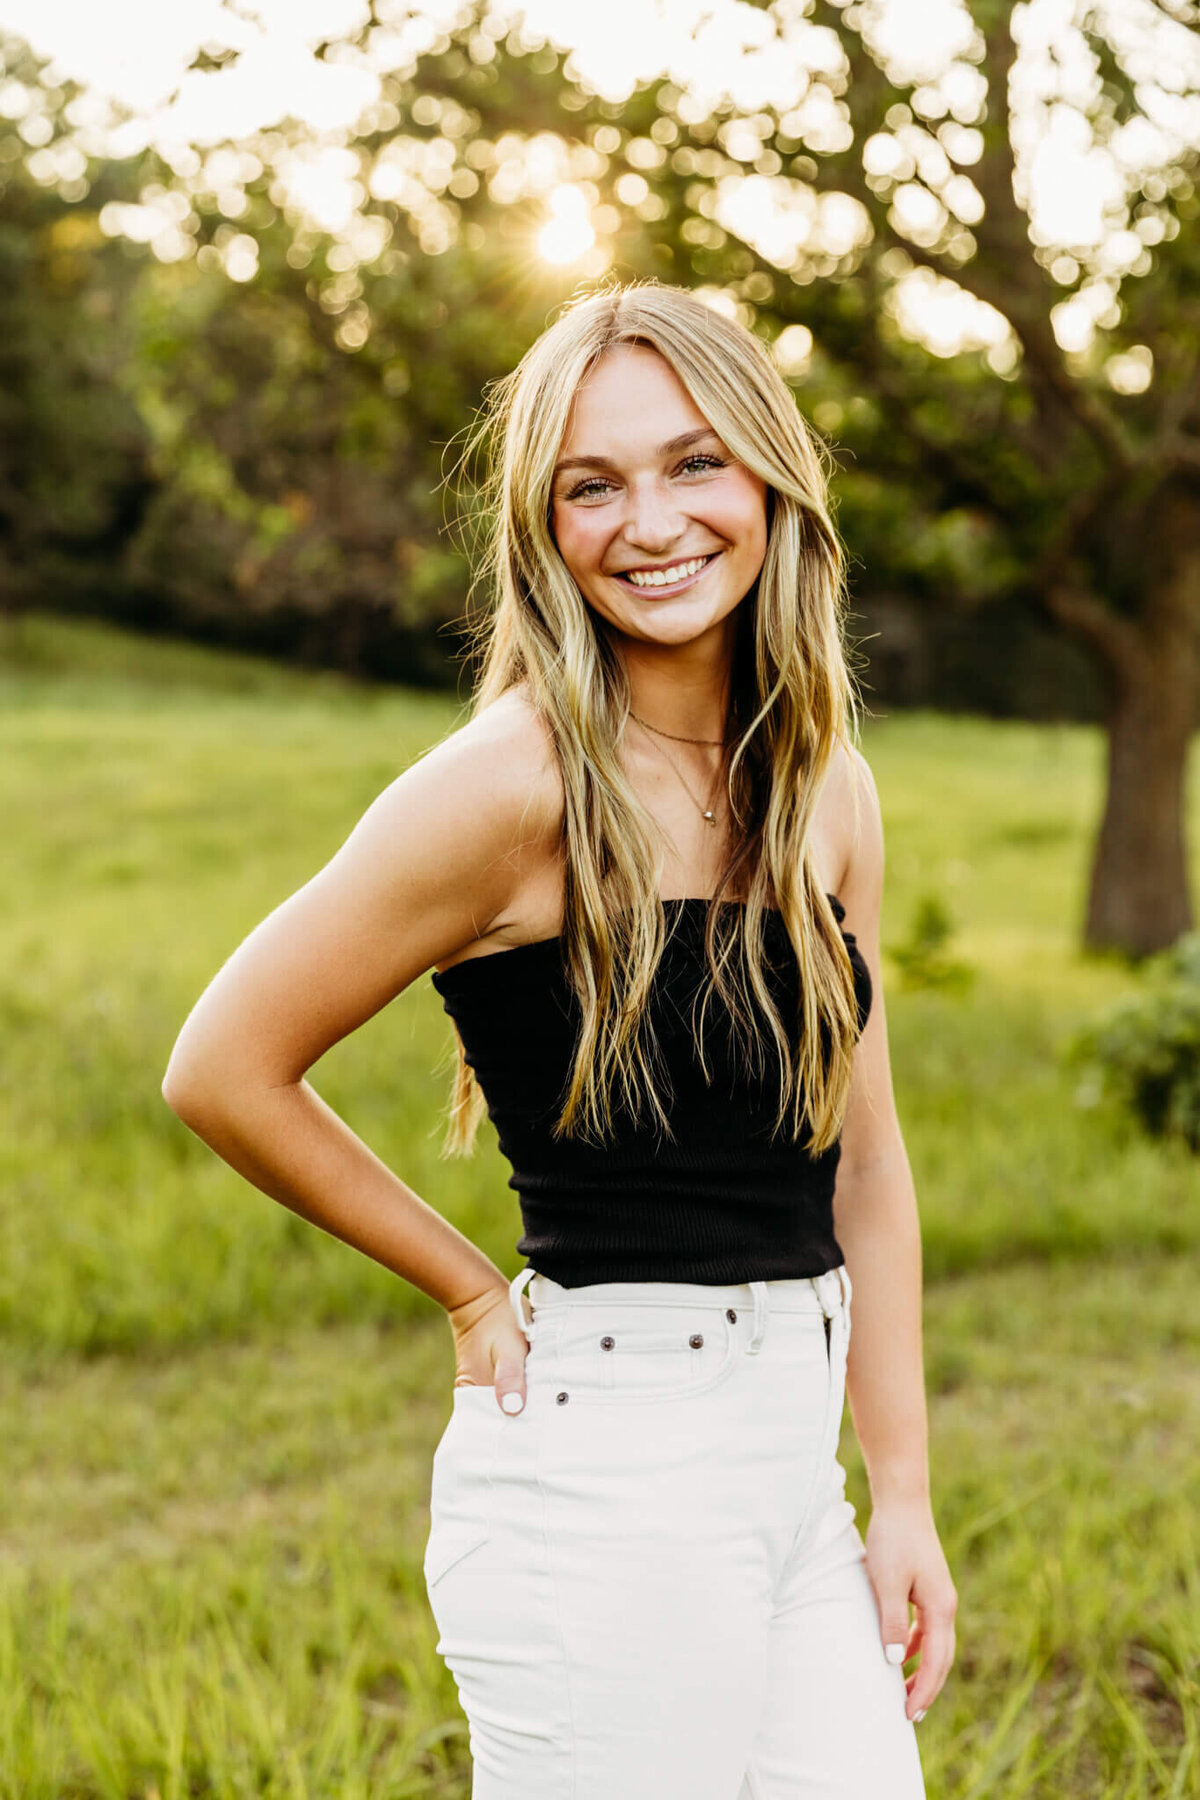 beautiful teen girl standing with her hand in her white pants pocket and black top smiling as the sun sets behind her during her Appleton Senior photo session